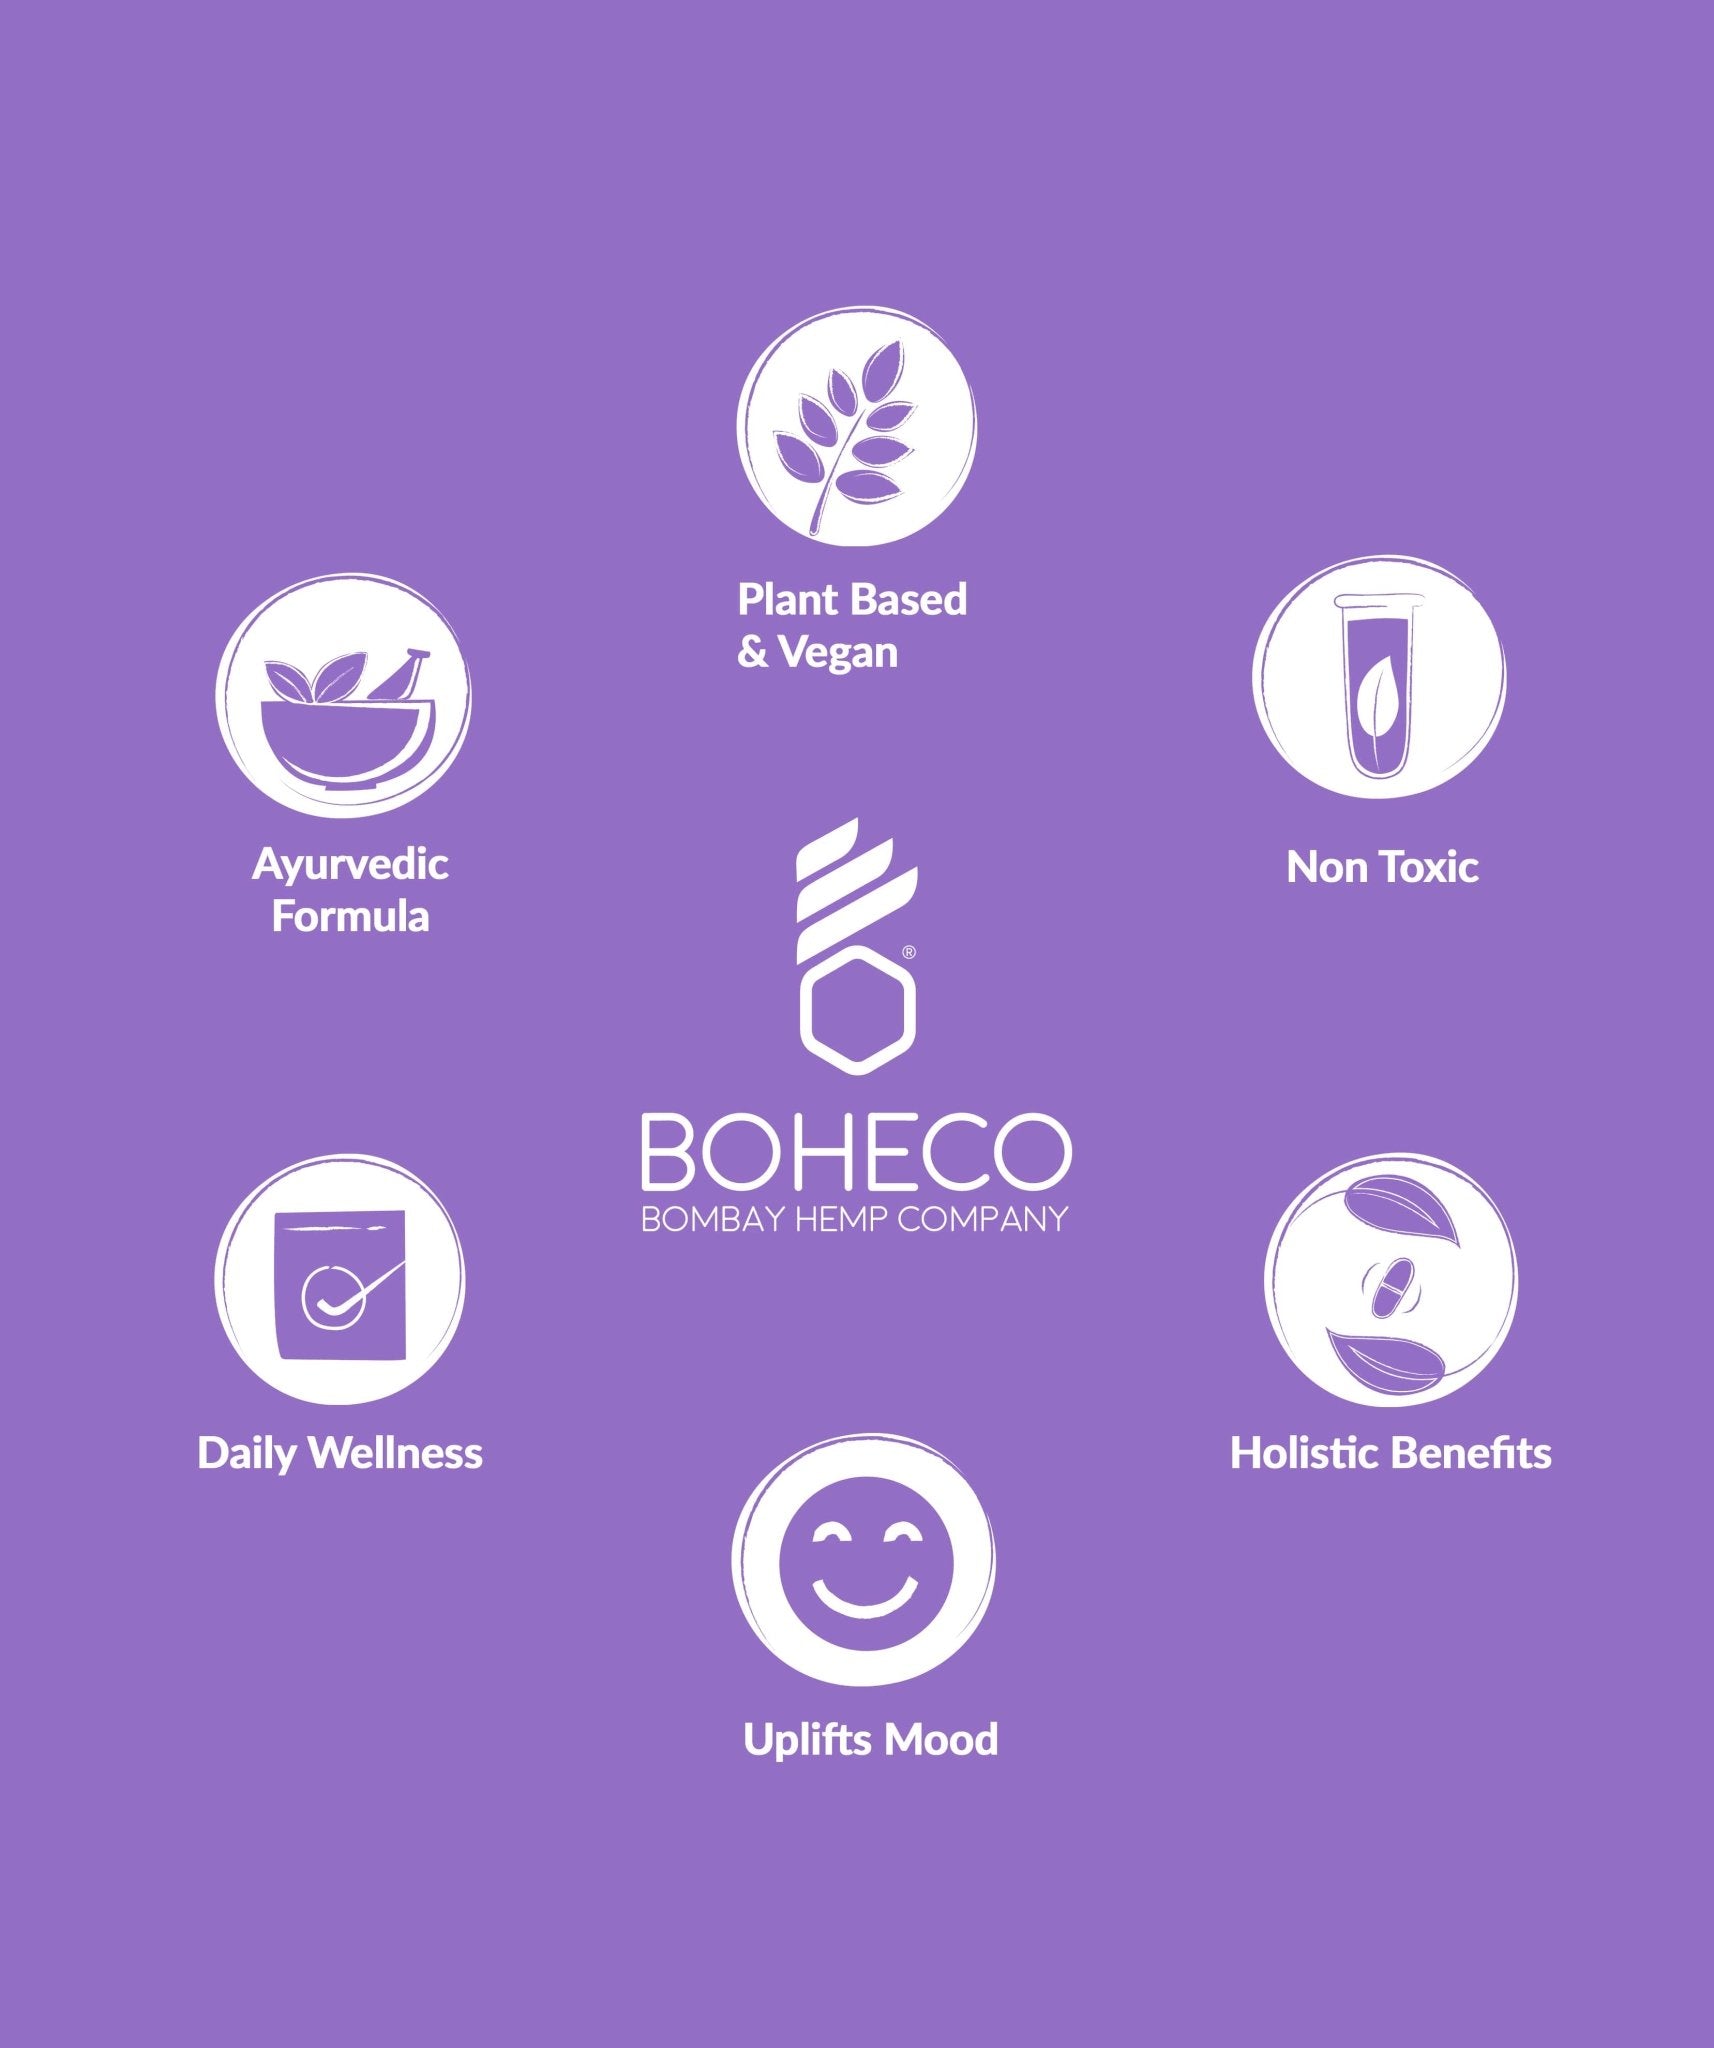 Boheco Calm - Relaxing Herbal Infusion Bags - CBD Store India